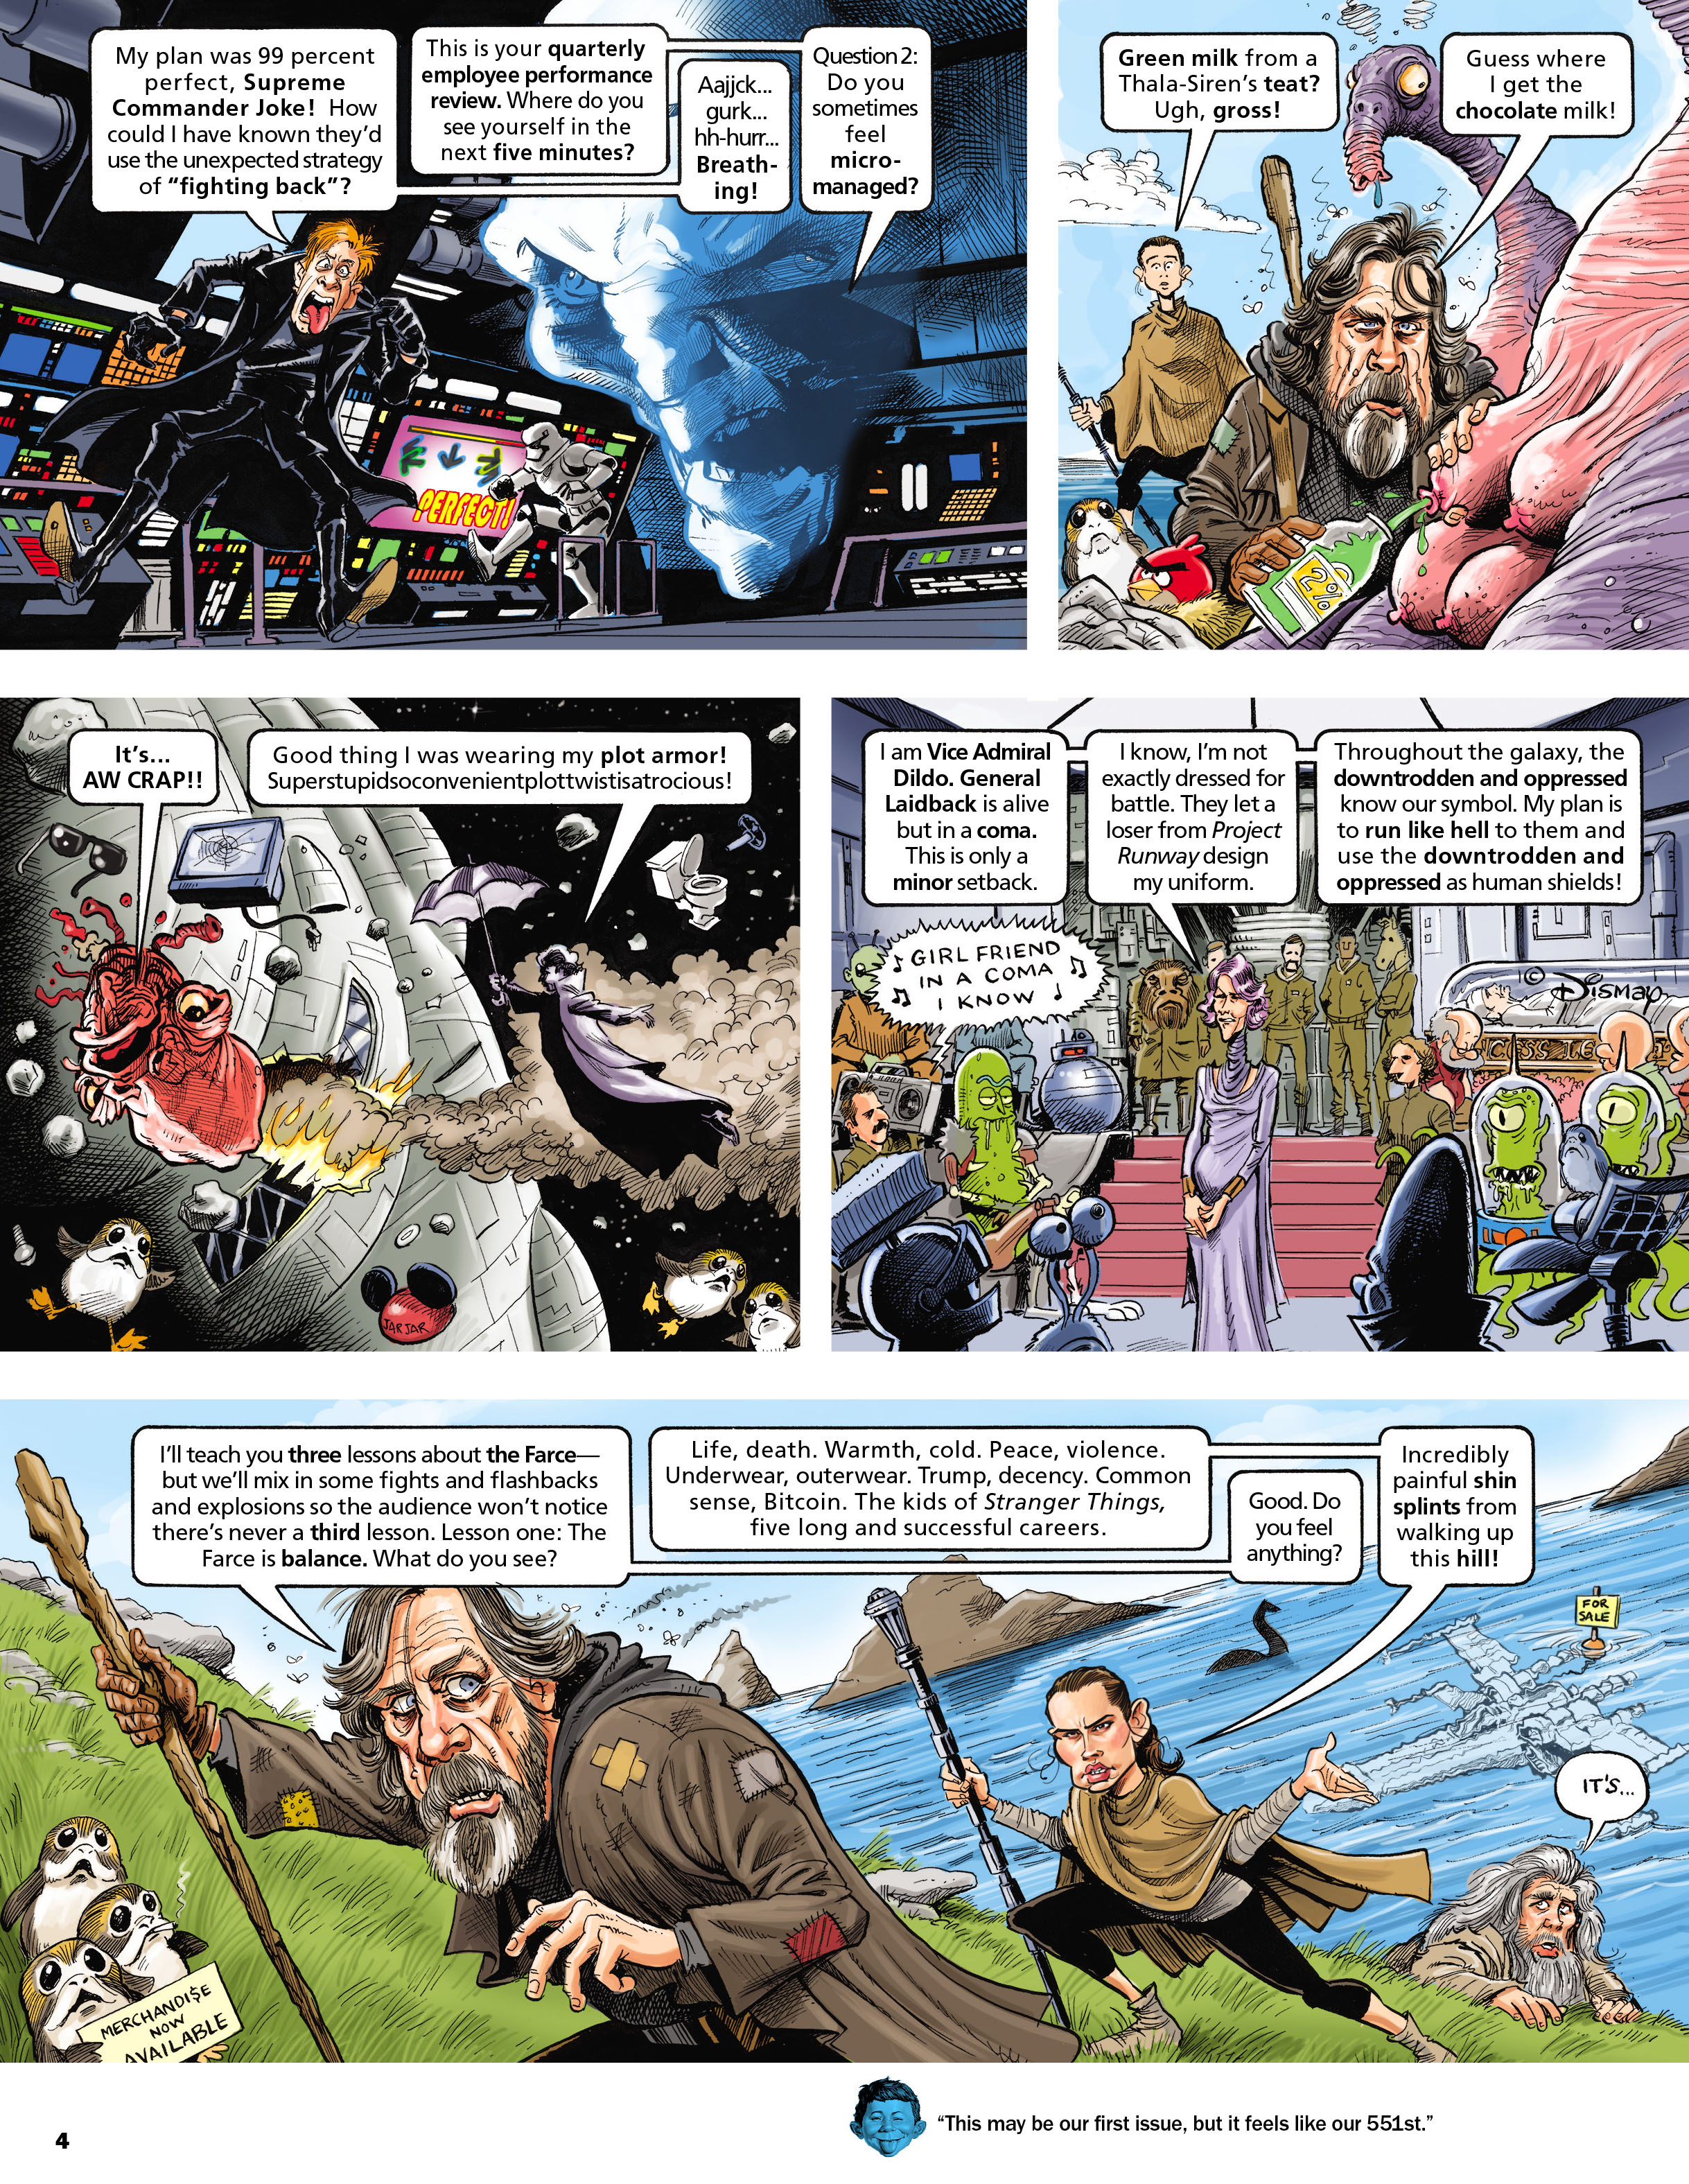 MAD Magazine (2018-): Chapter 1 - Page 4